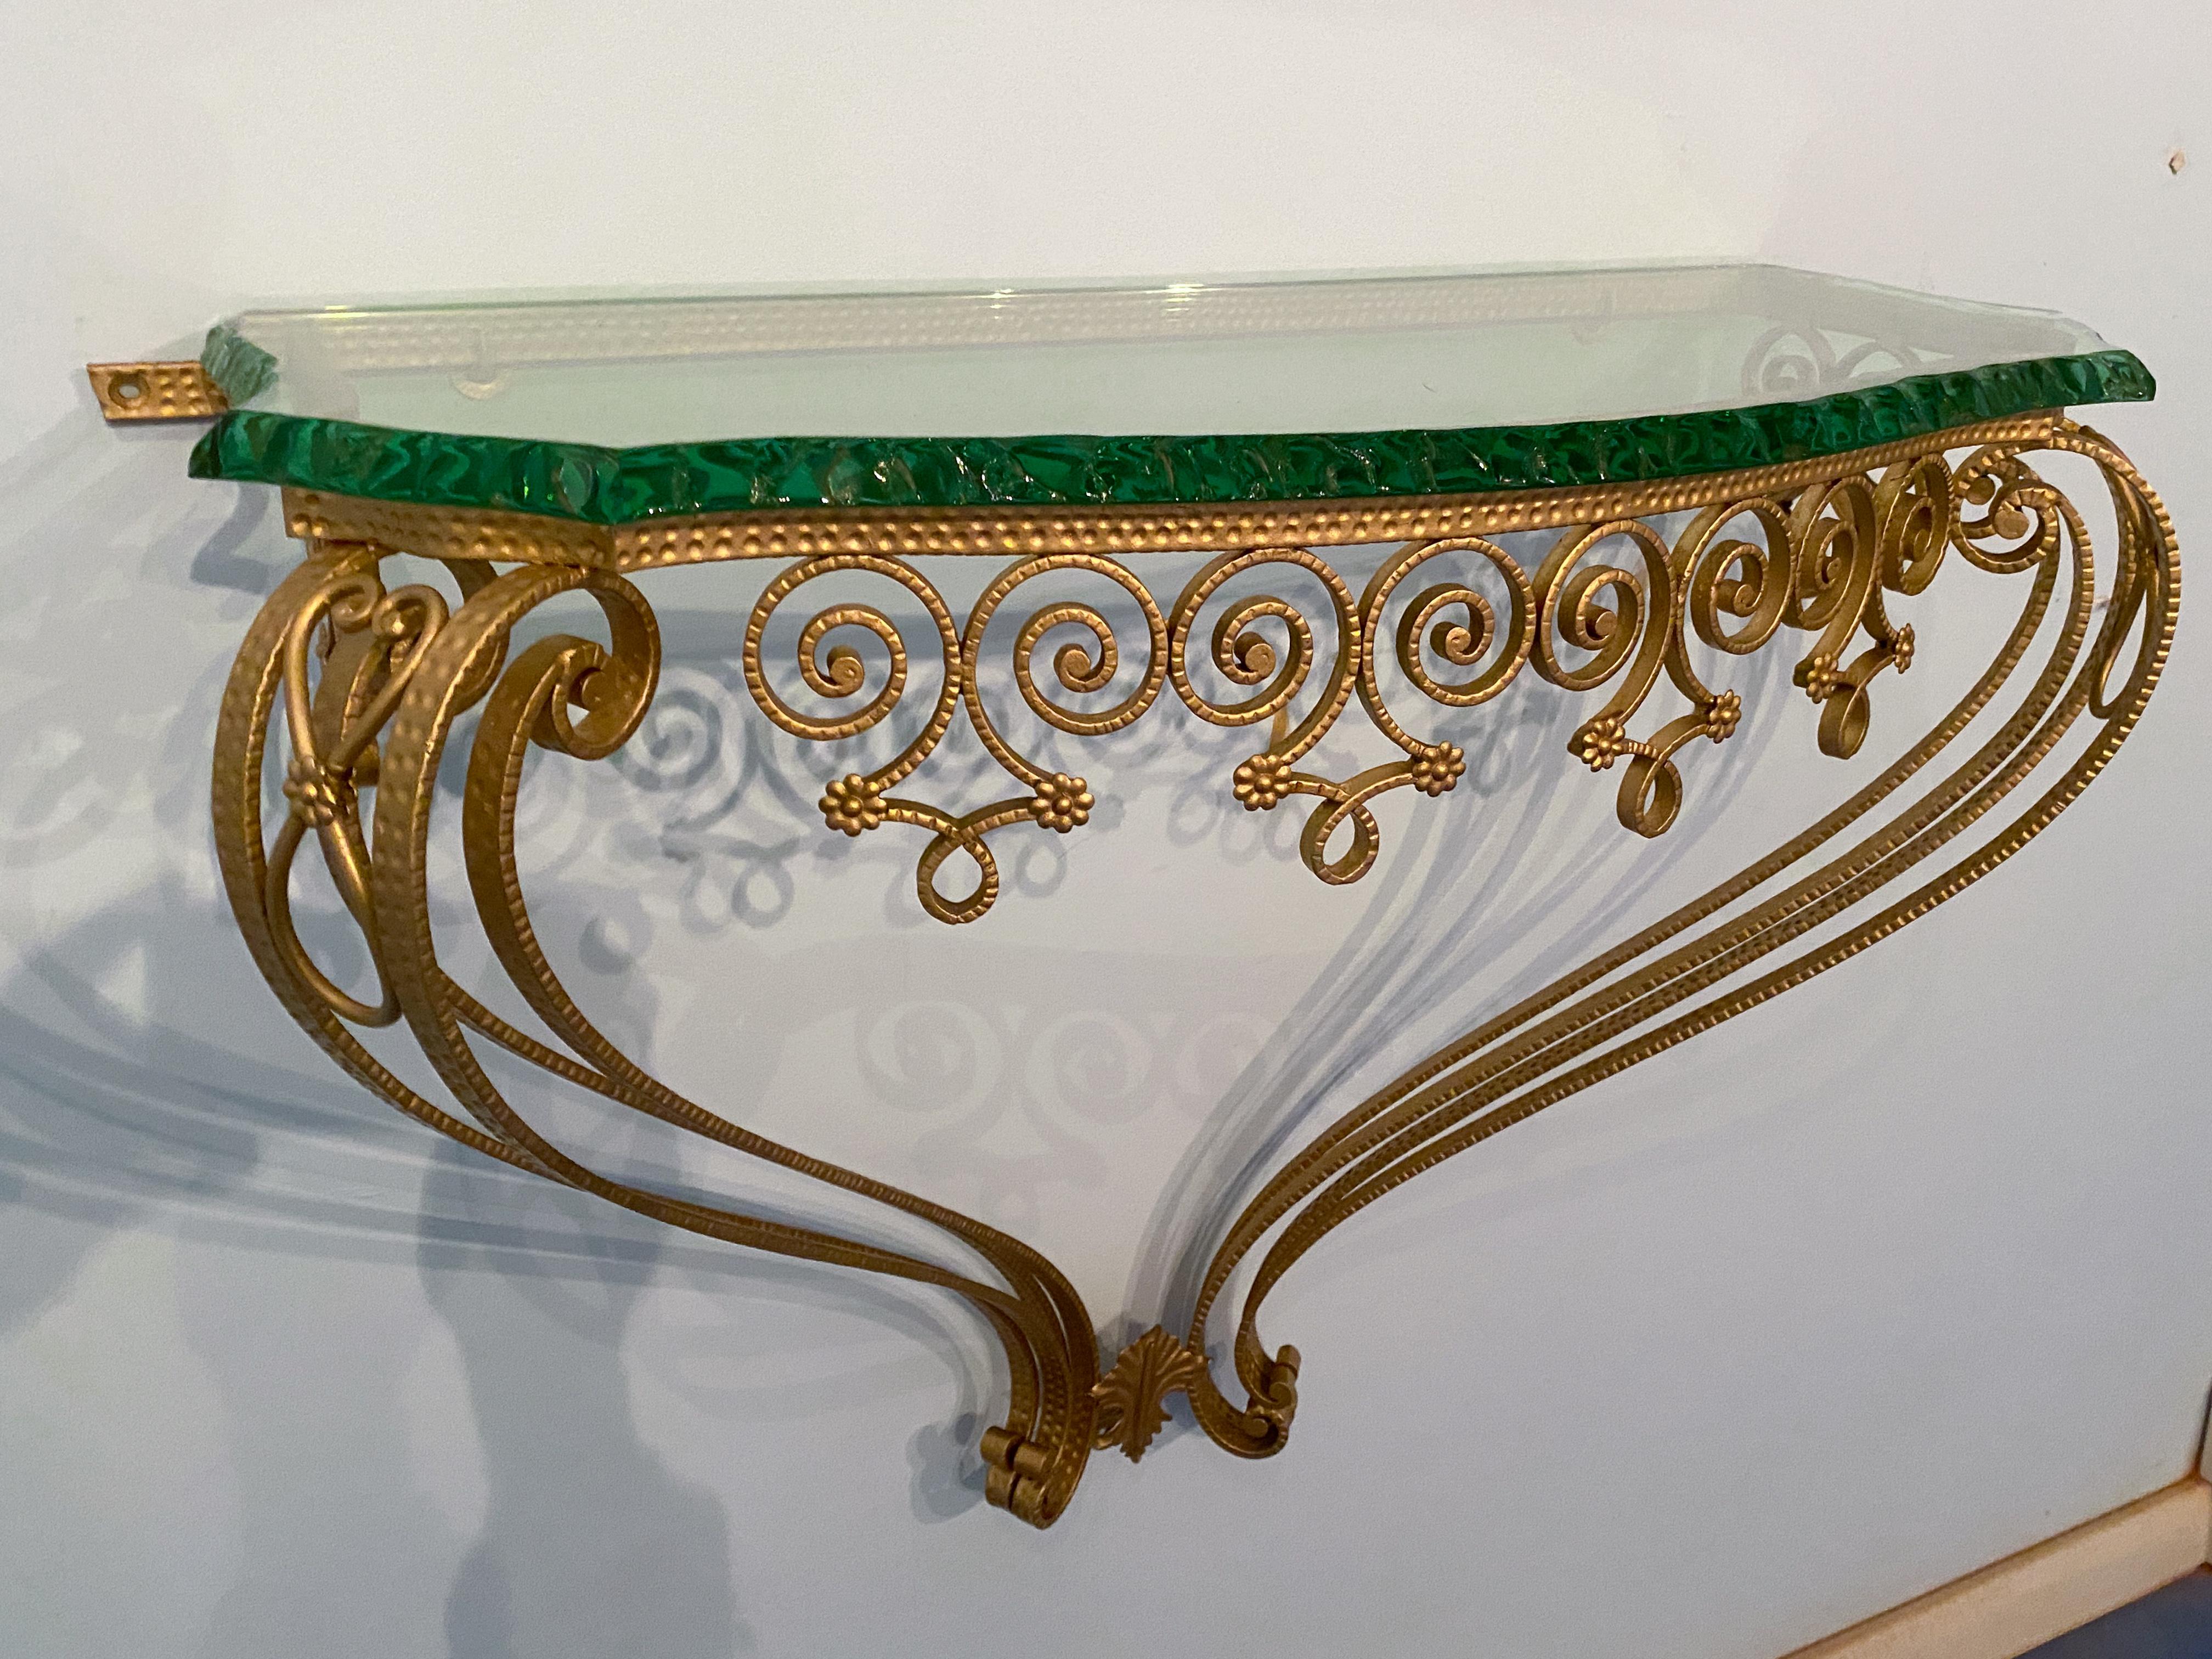 This magnificent console, designed in the 1950s by Pierluigi Colli, is a work of art distinguished by its high-quality craftsmanship in handcrafted metalwork. The thick green crystal top was cut by hand with special pliers to make it unique, making